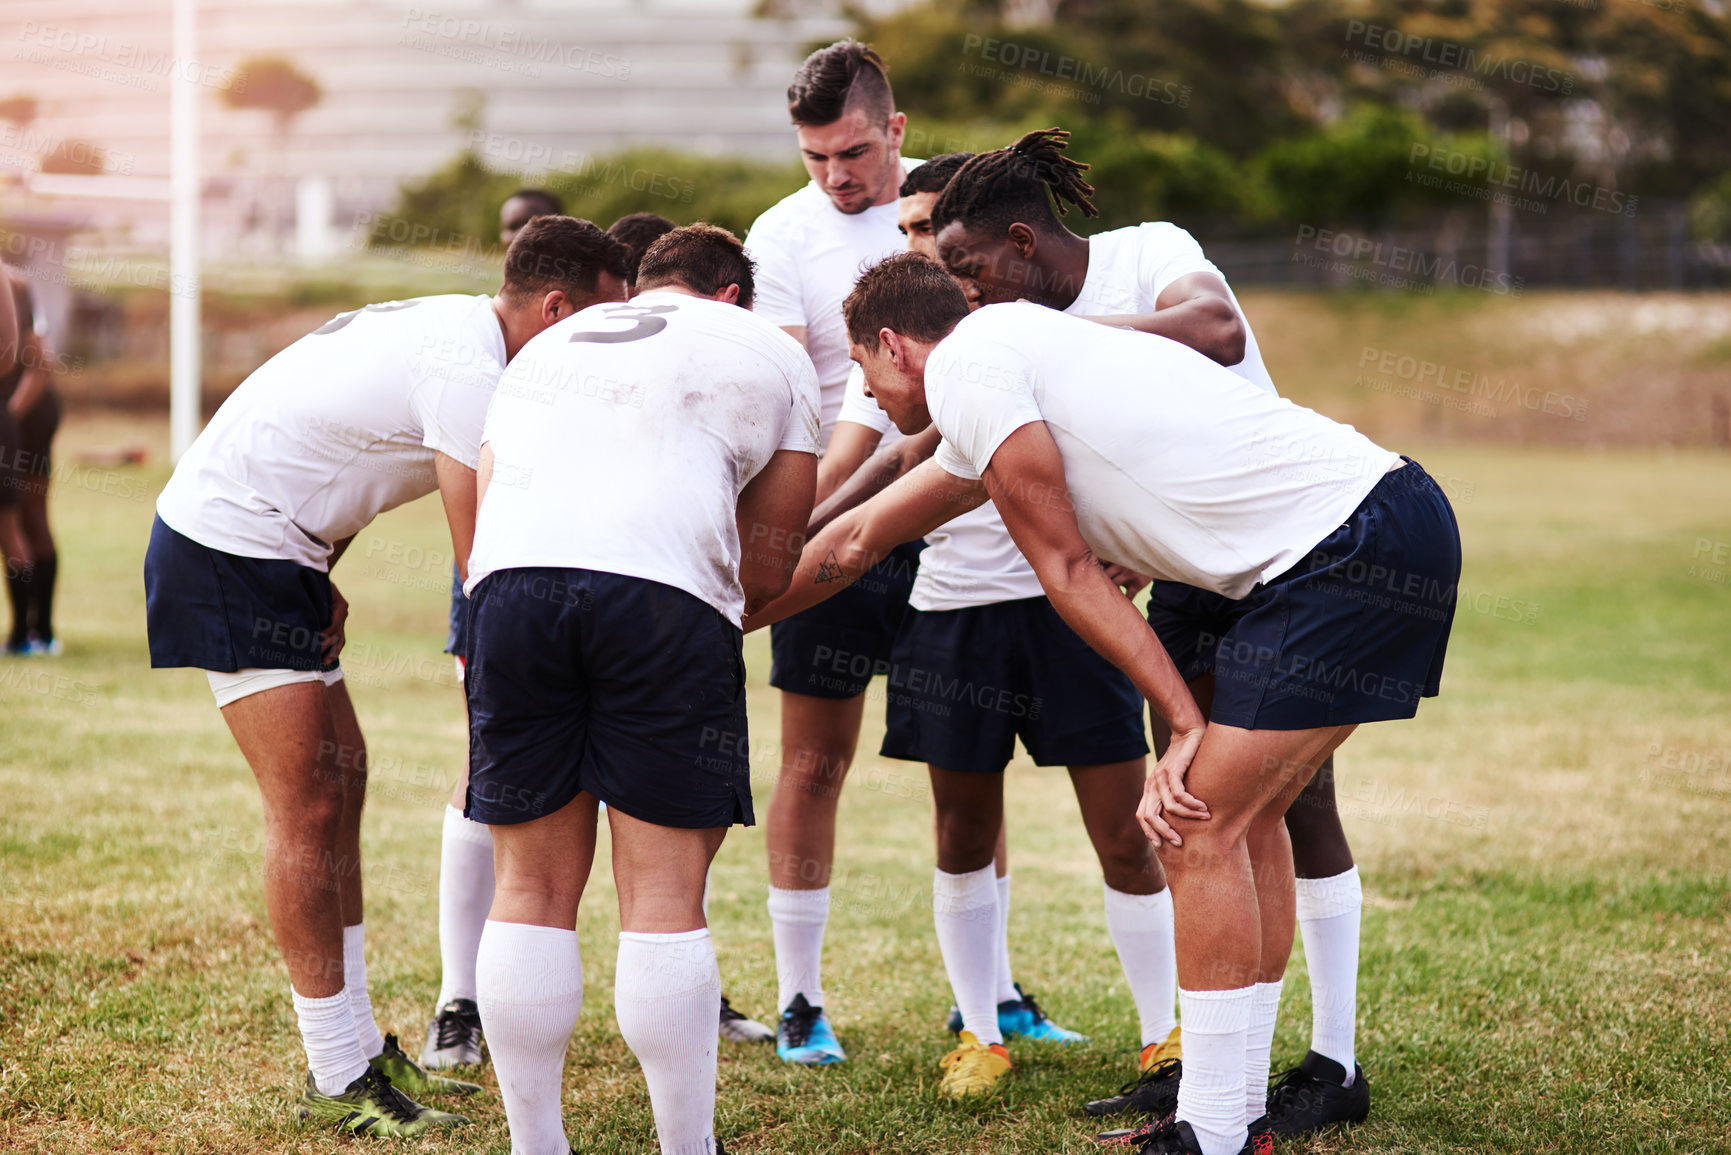 Buy stock photo Shot of a group of young men joining their hands in solidarity before playing a game of rugby